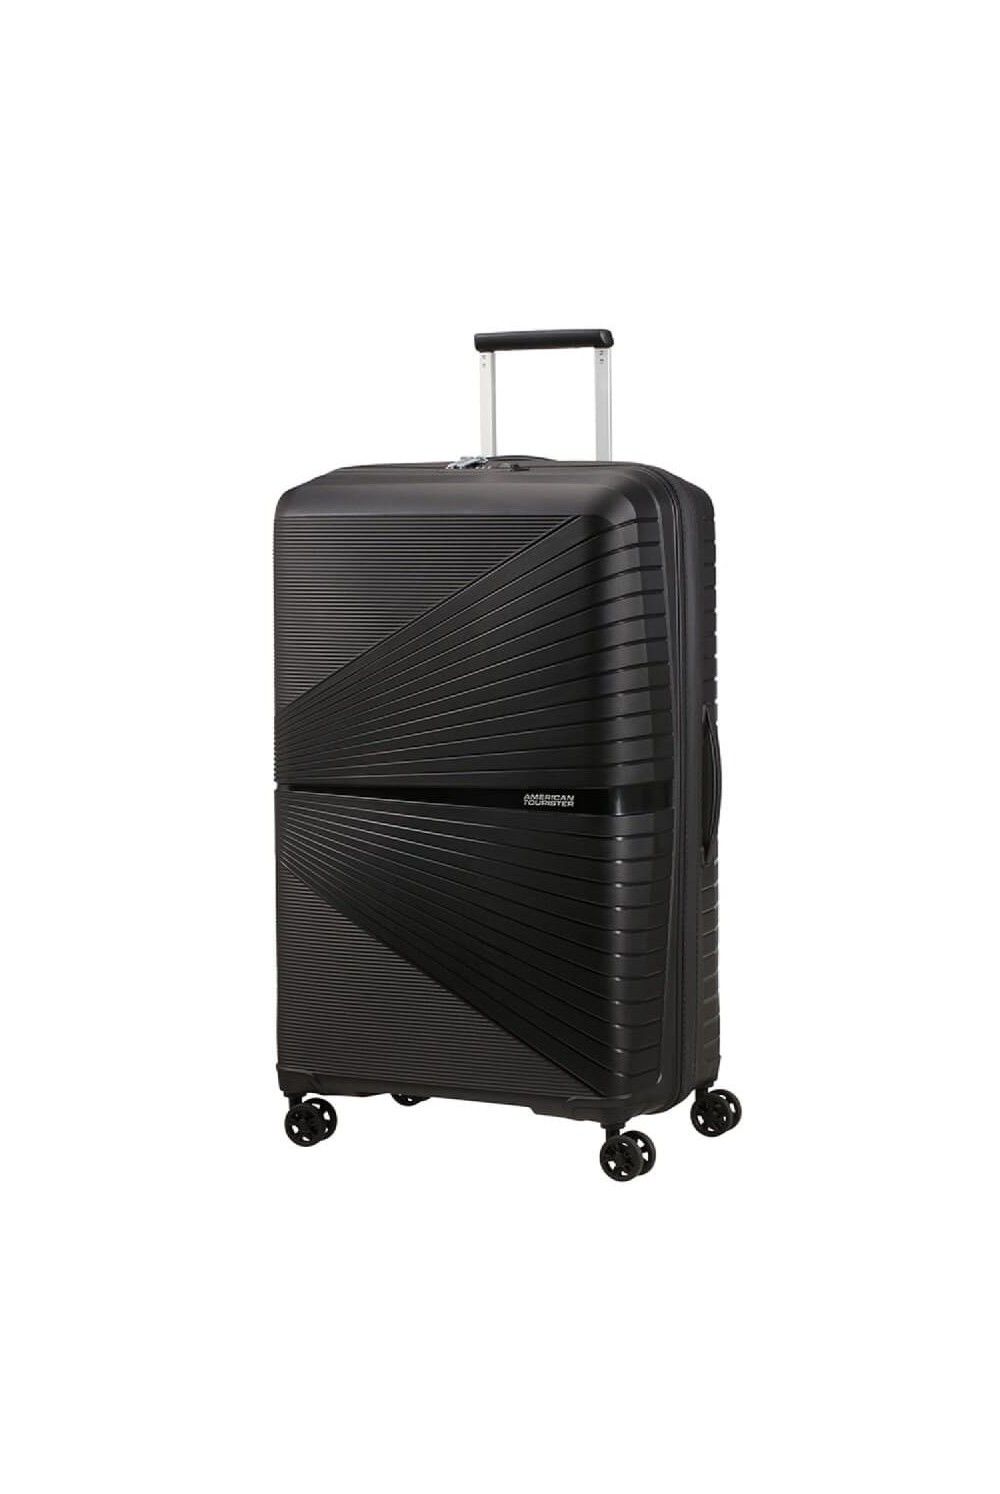 Airconic 77 cm 4 roues Valise grand